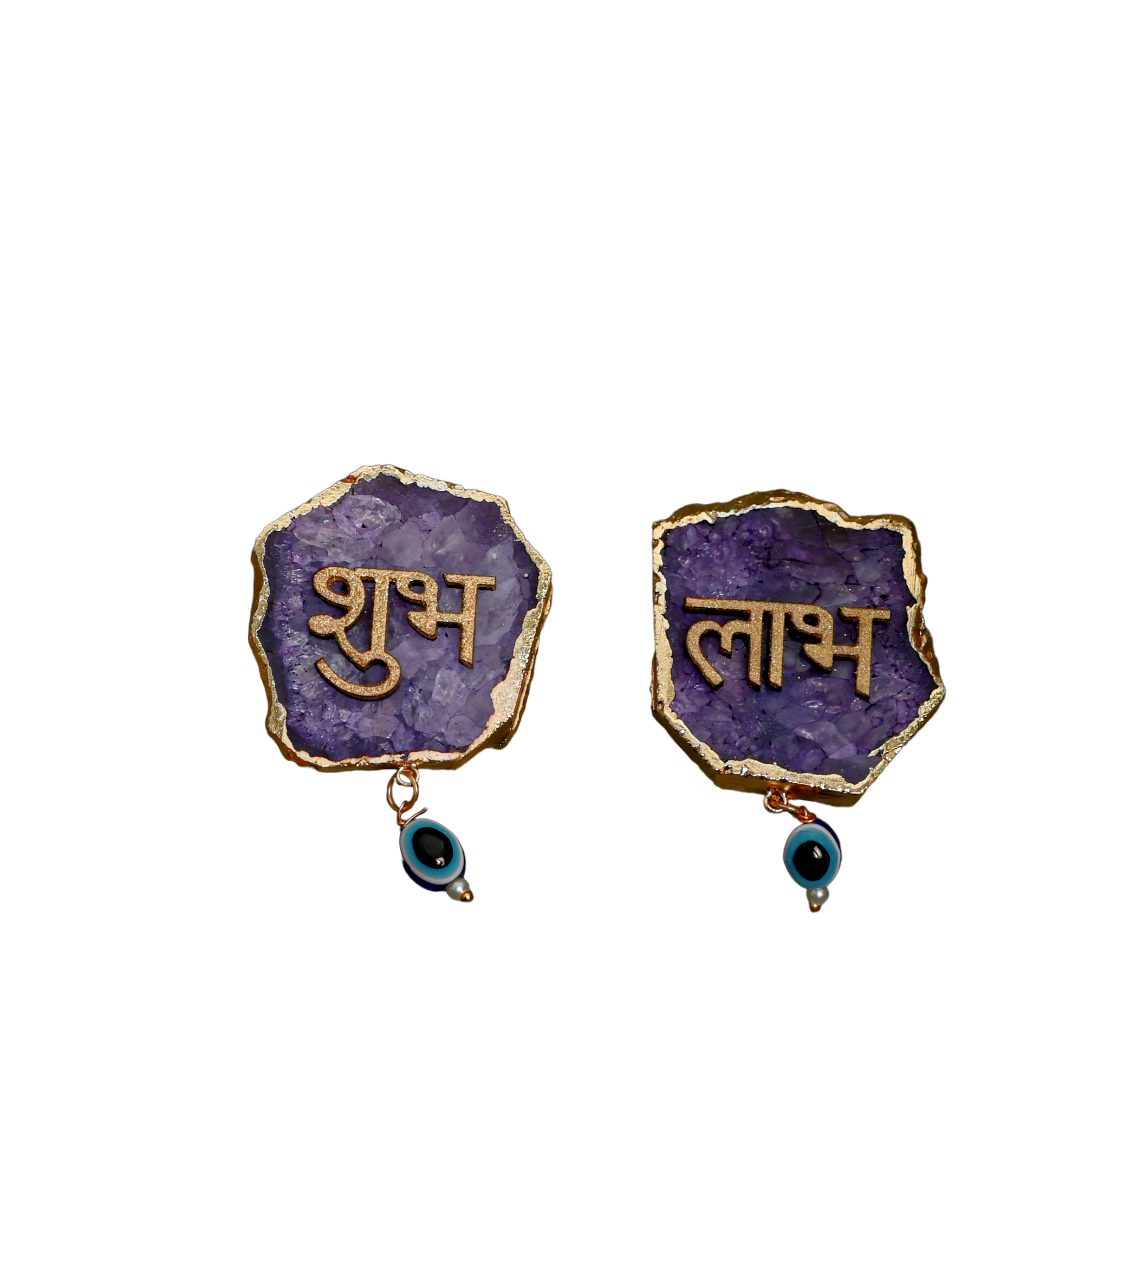 Handcrafted Agate Shubh Labh Door Hangings Showpiece Perfect for Diwali Weddings or House Warmings Garland- Purple